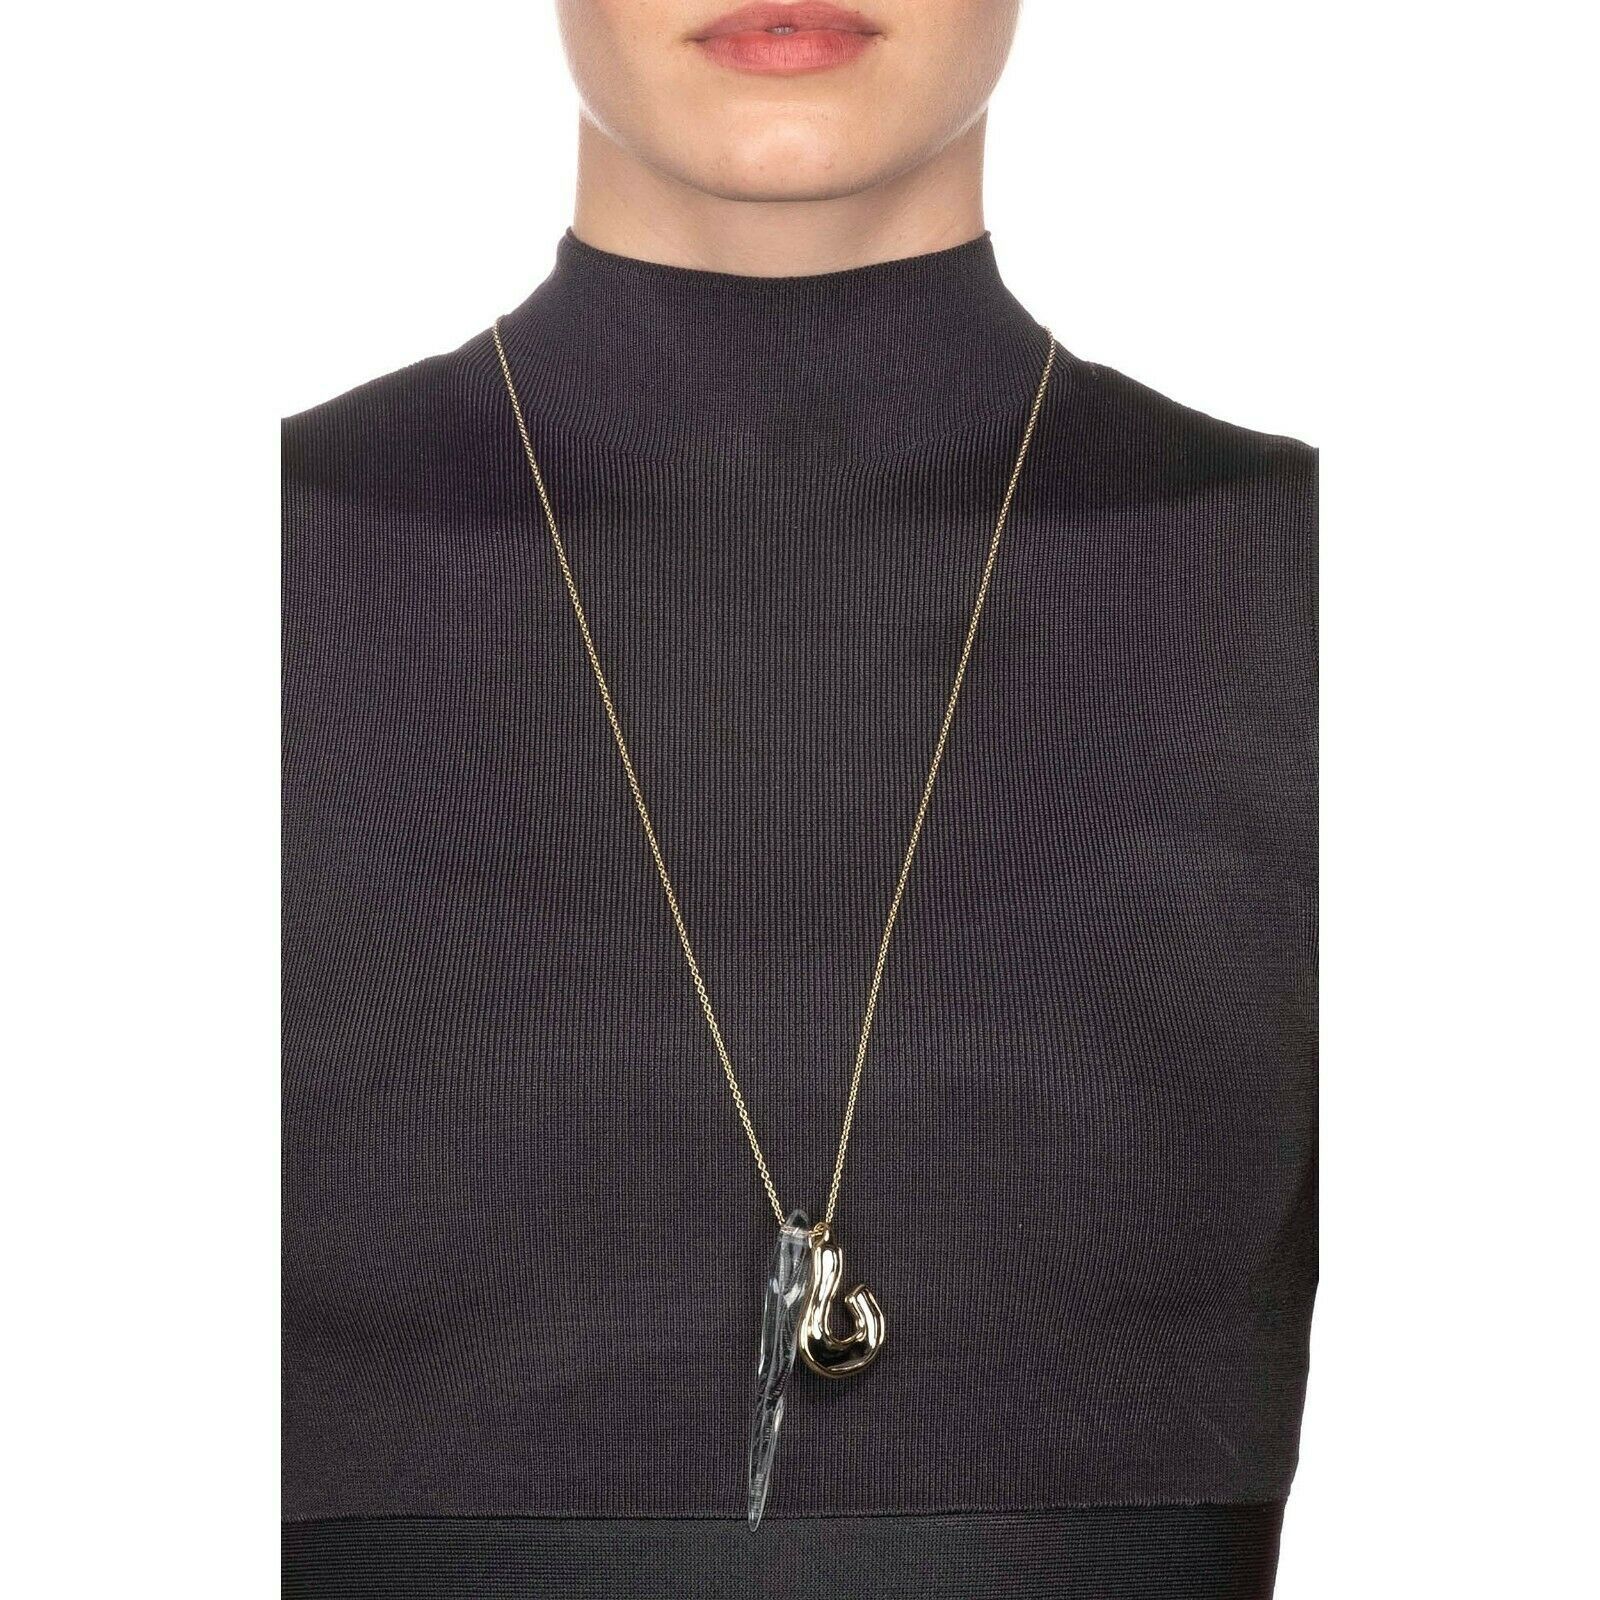 Alexis Bittar Crystal Lucite Liquid Spike Long Pendant Statement Necklace NWT - $128.21